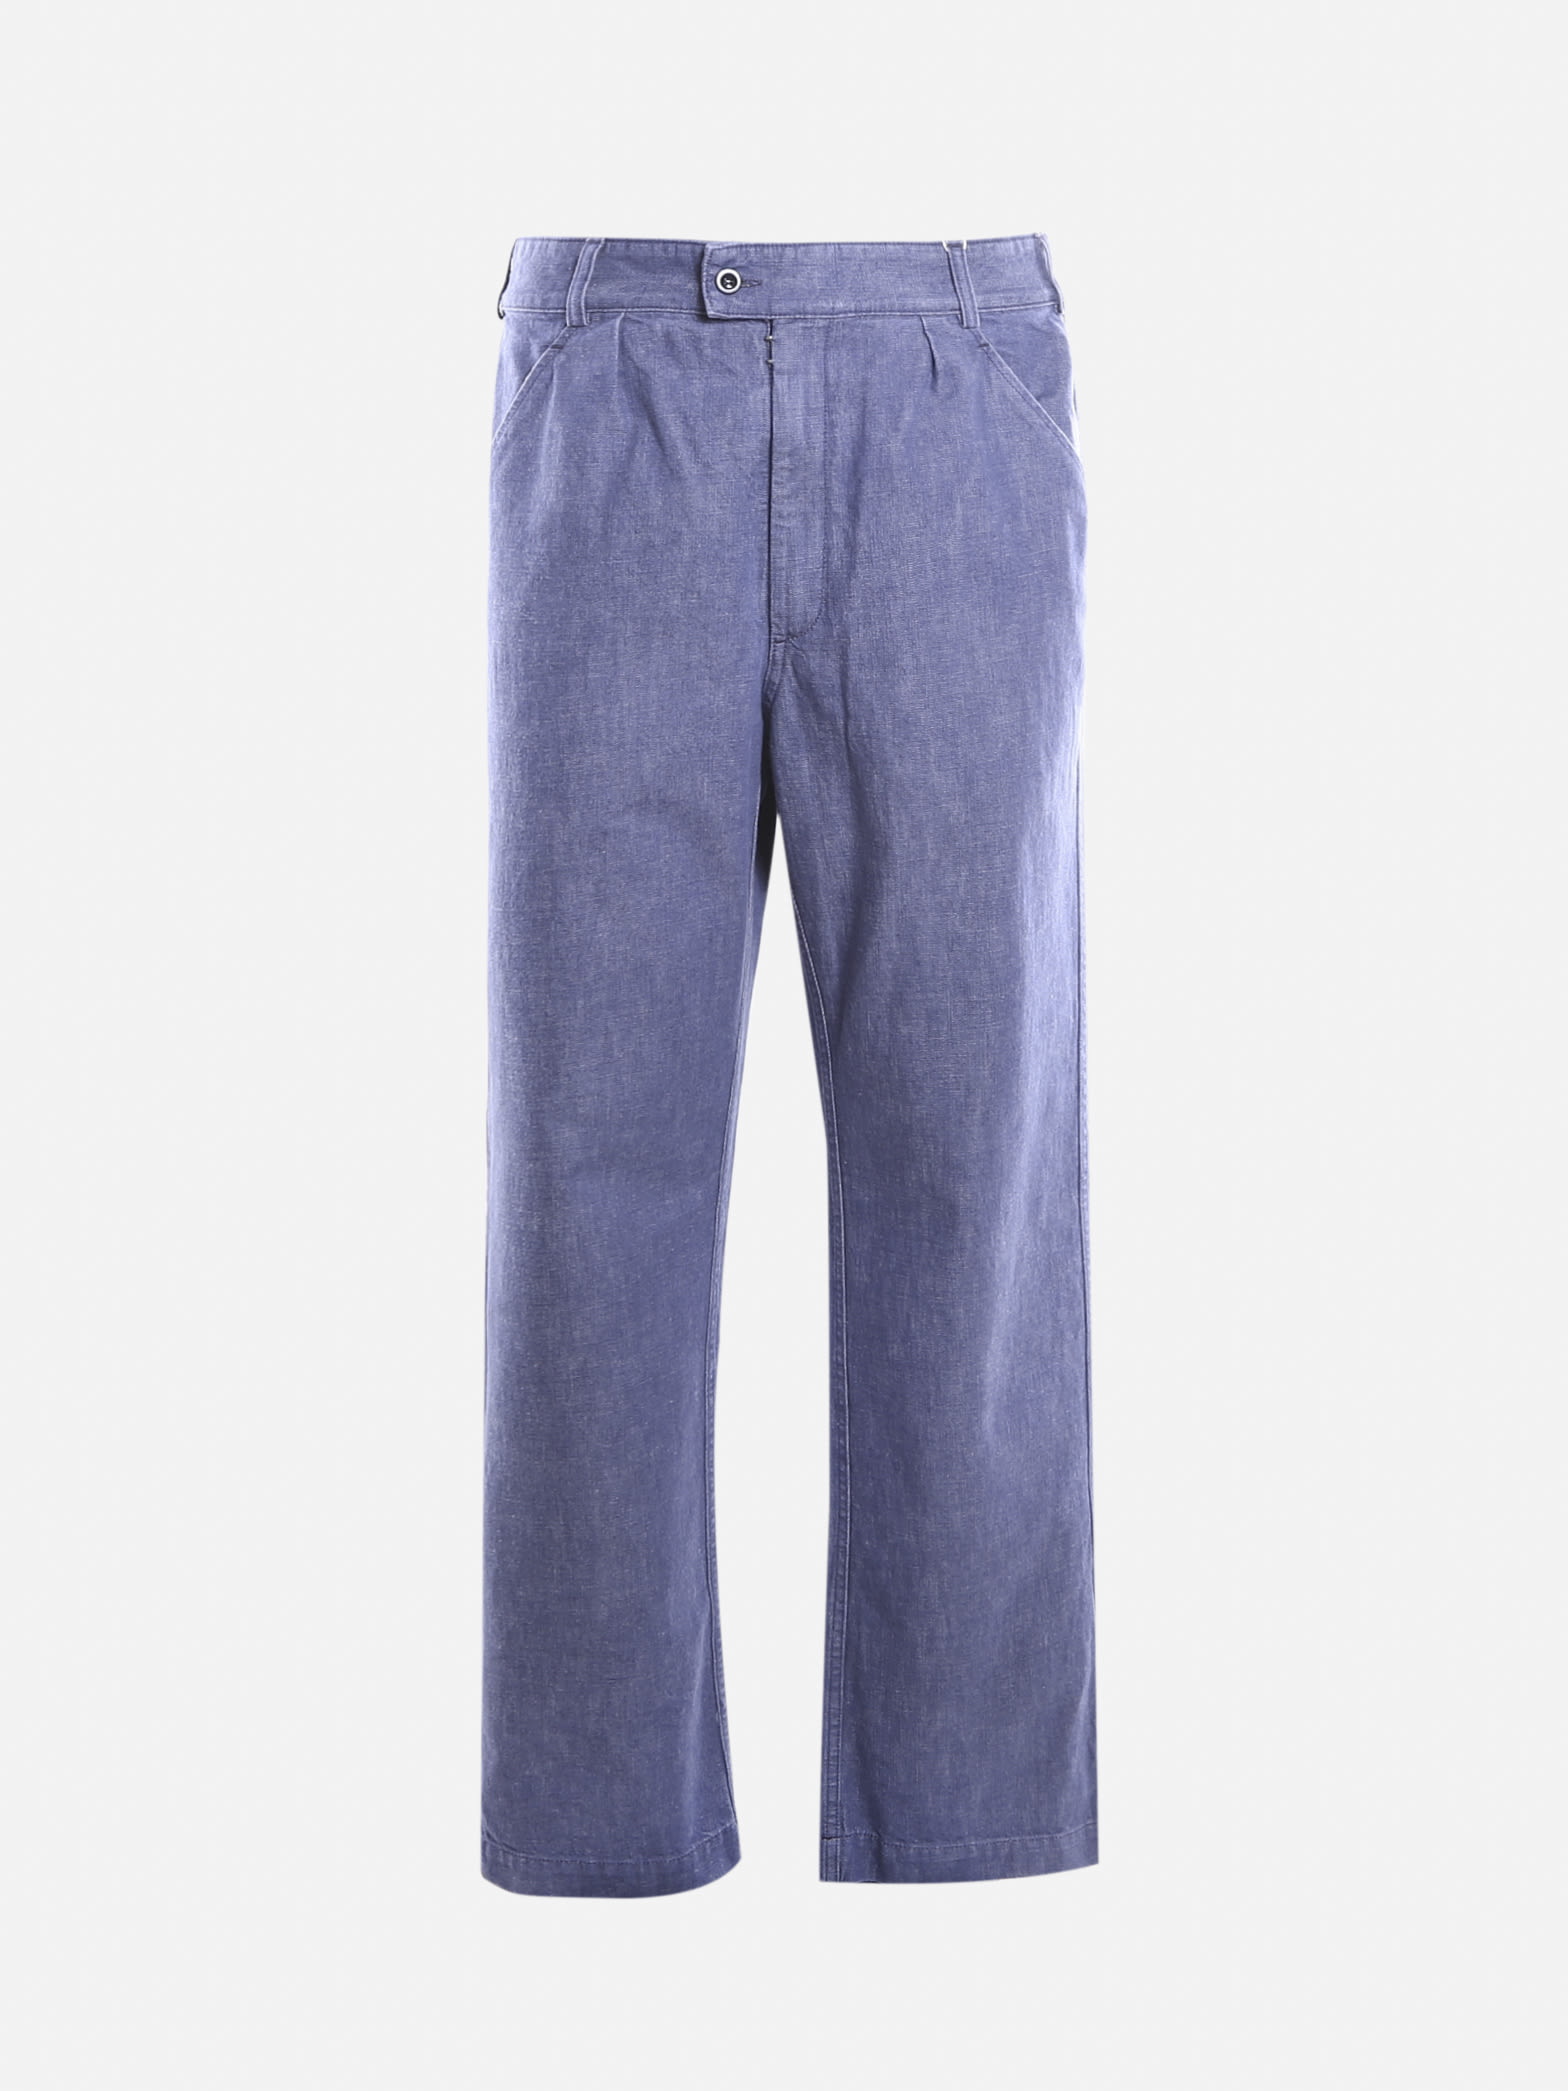 Maison Margiela Pants With Pence Made Of Cotton